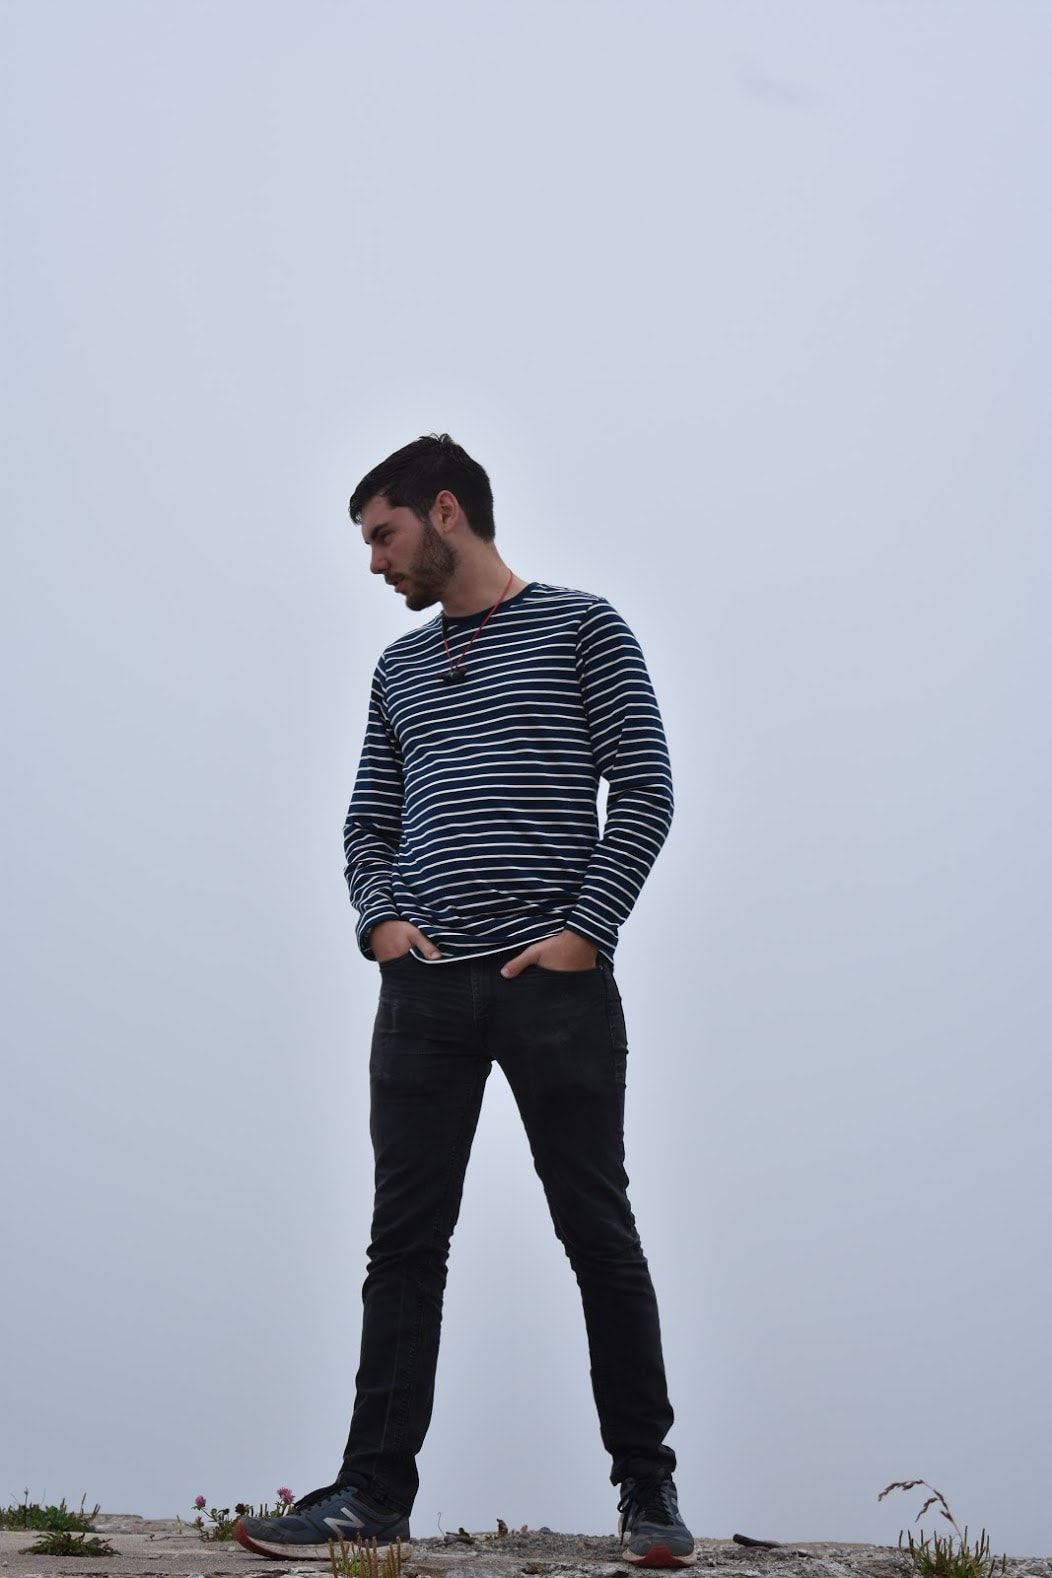 My brother Nathan, with short dark hair and a beard, wearing a black-and-white long sleeved striped shirt. He strikes a hands-in-pockets pose against a gray foggy sky.